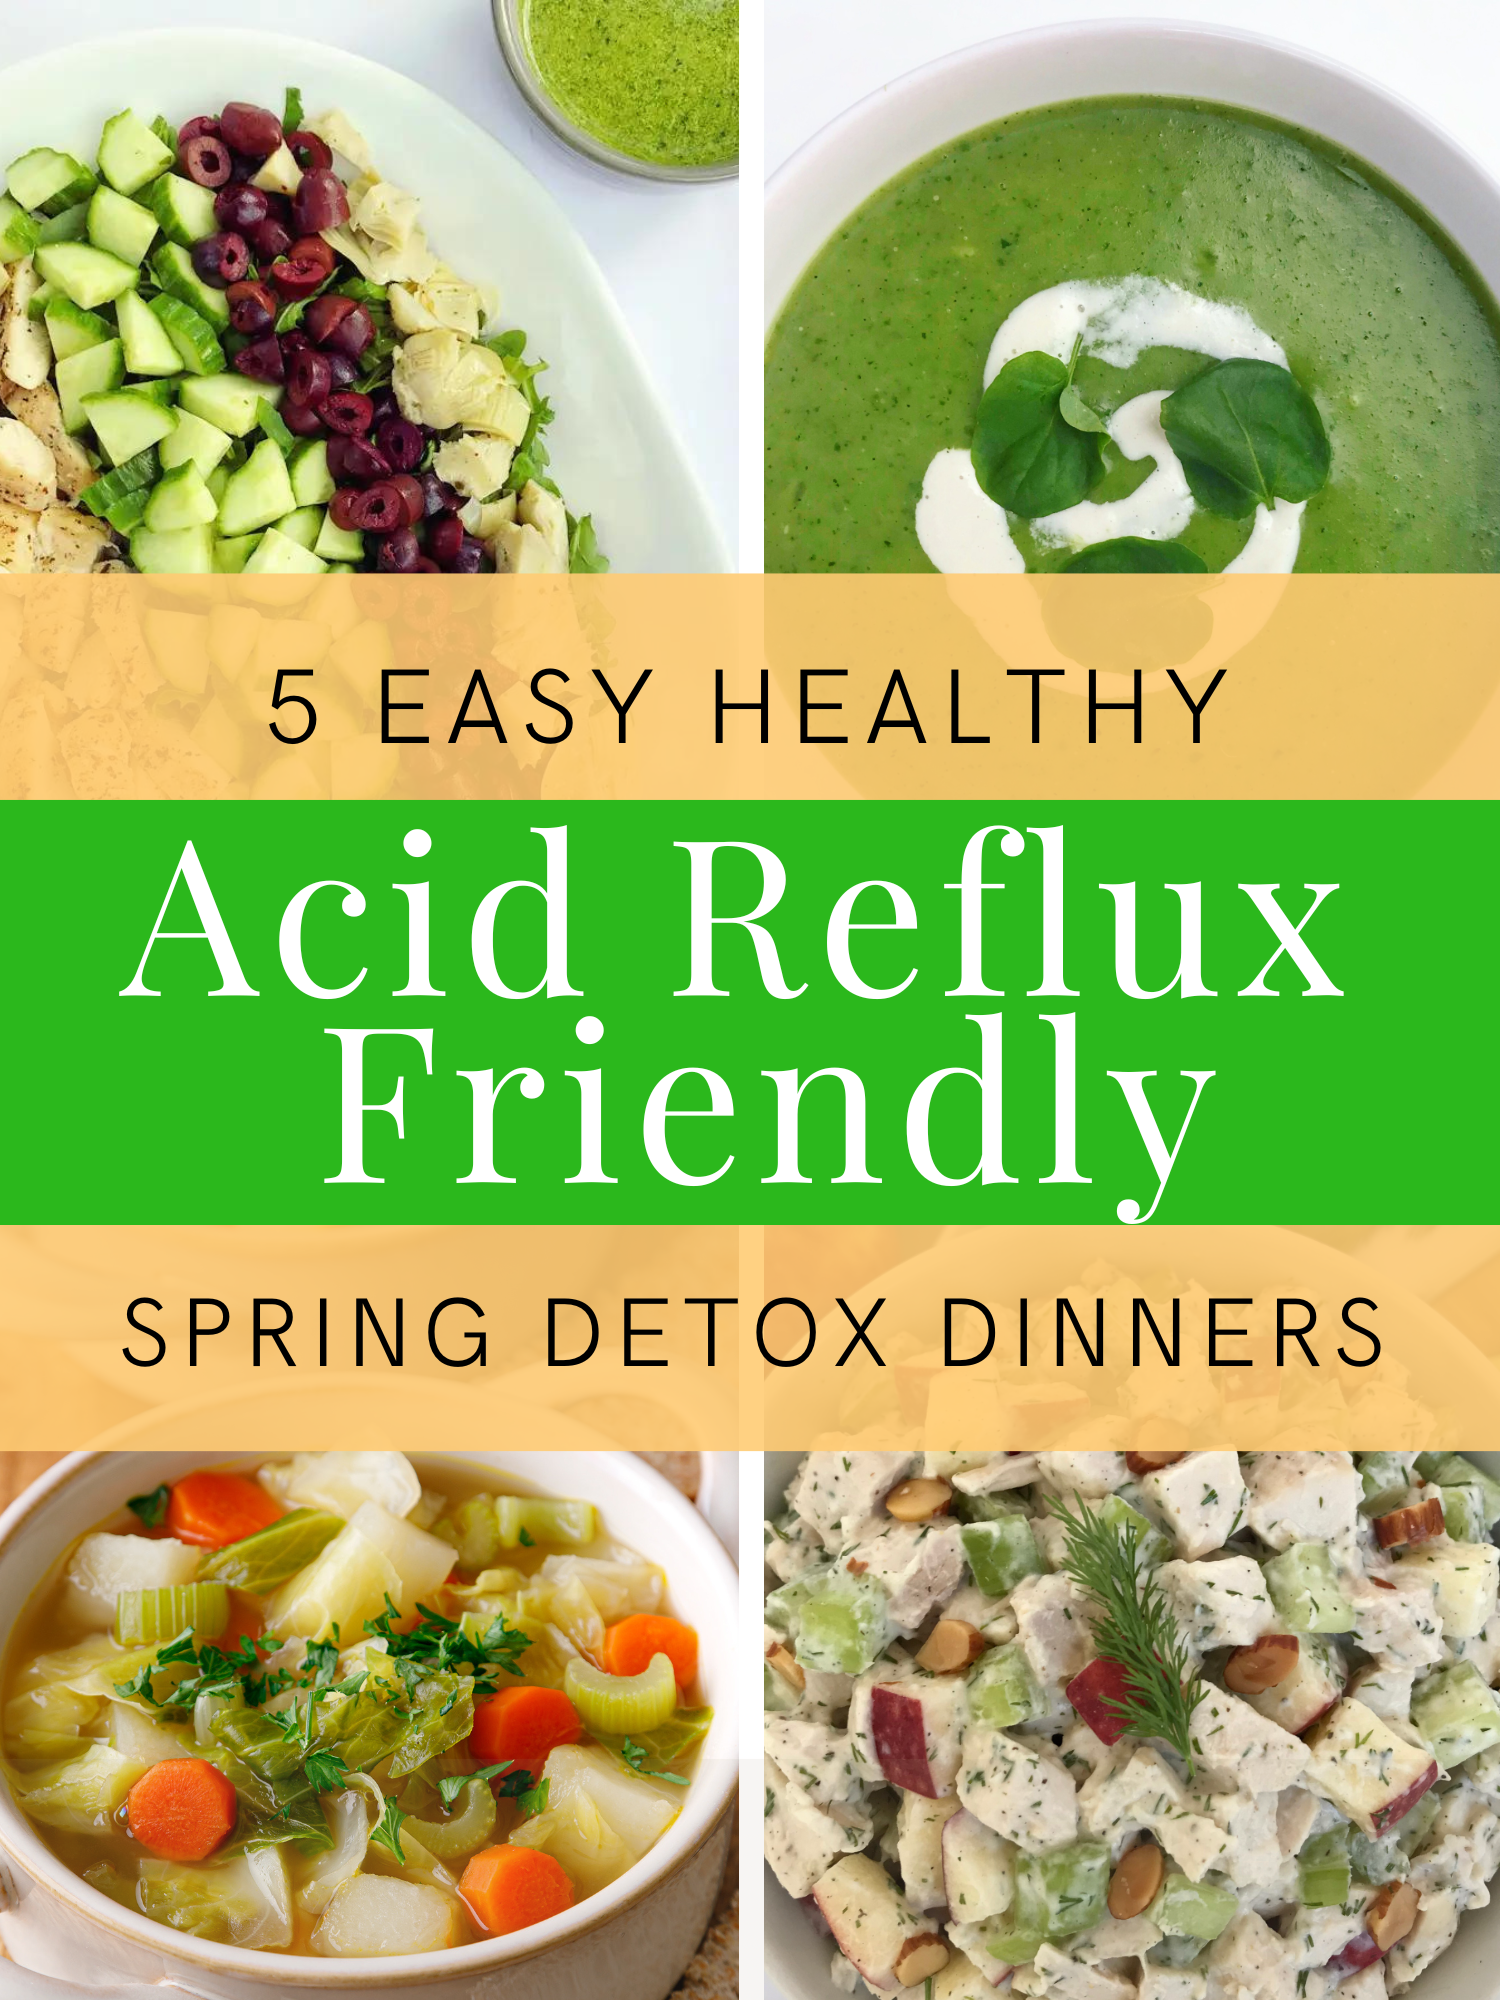 Images of different easy healthy reflux friendly recipes